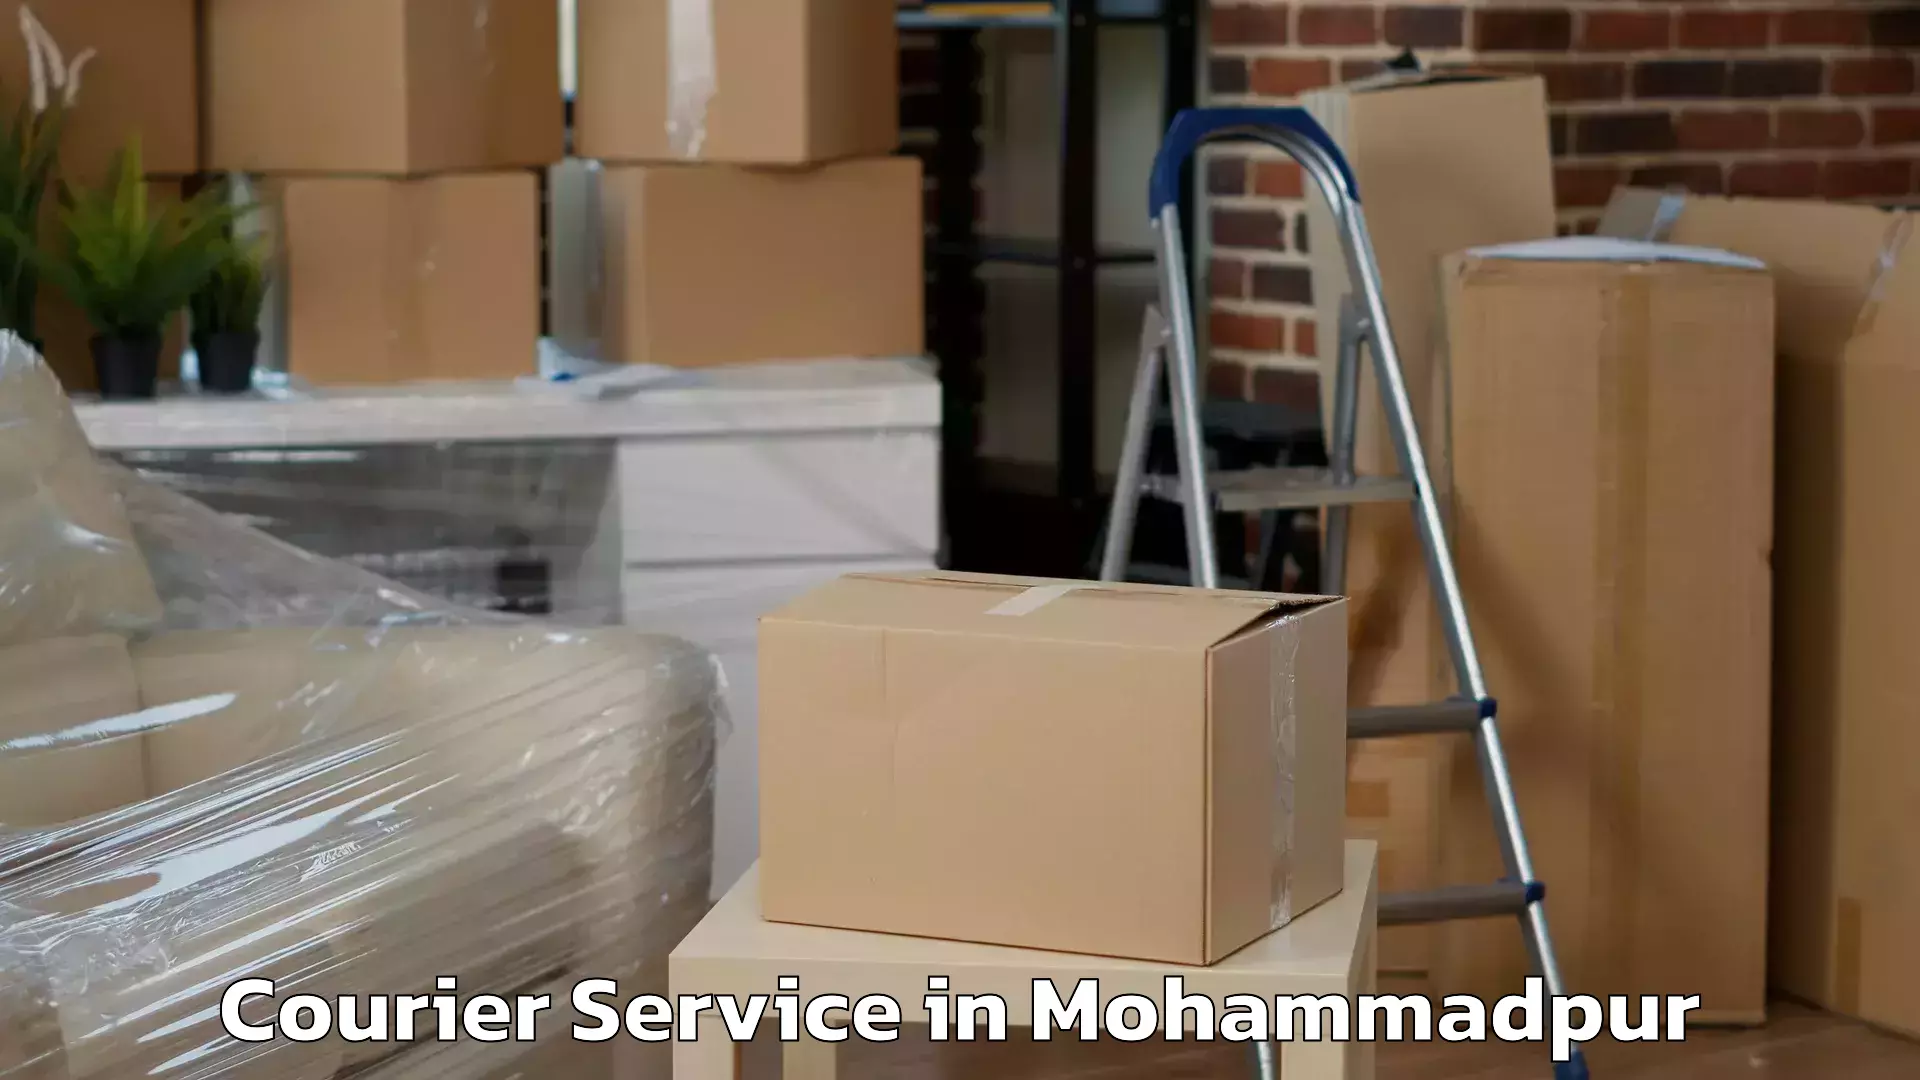 24-hour courier services in Mohammadpur